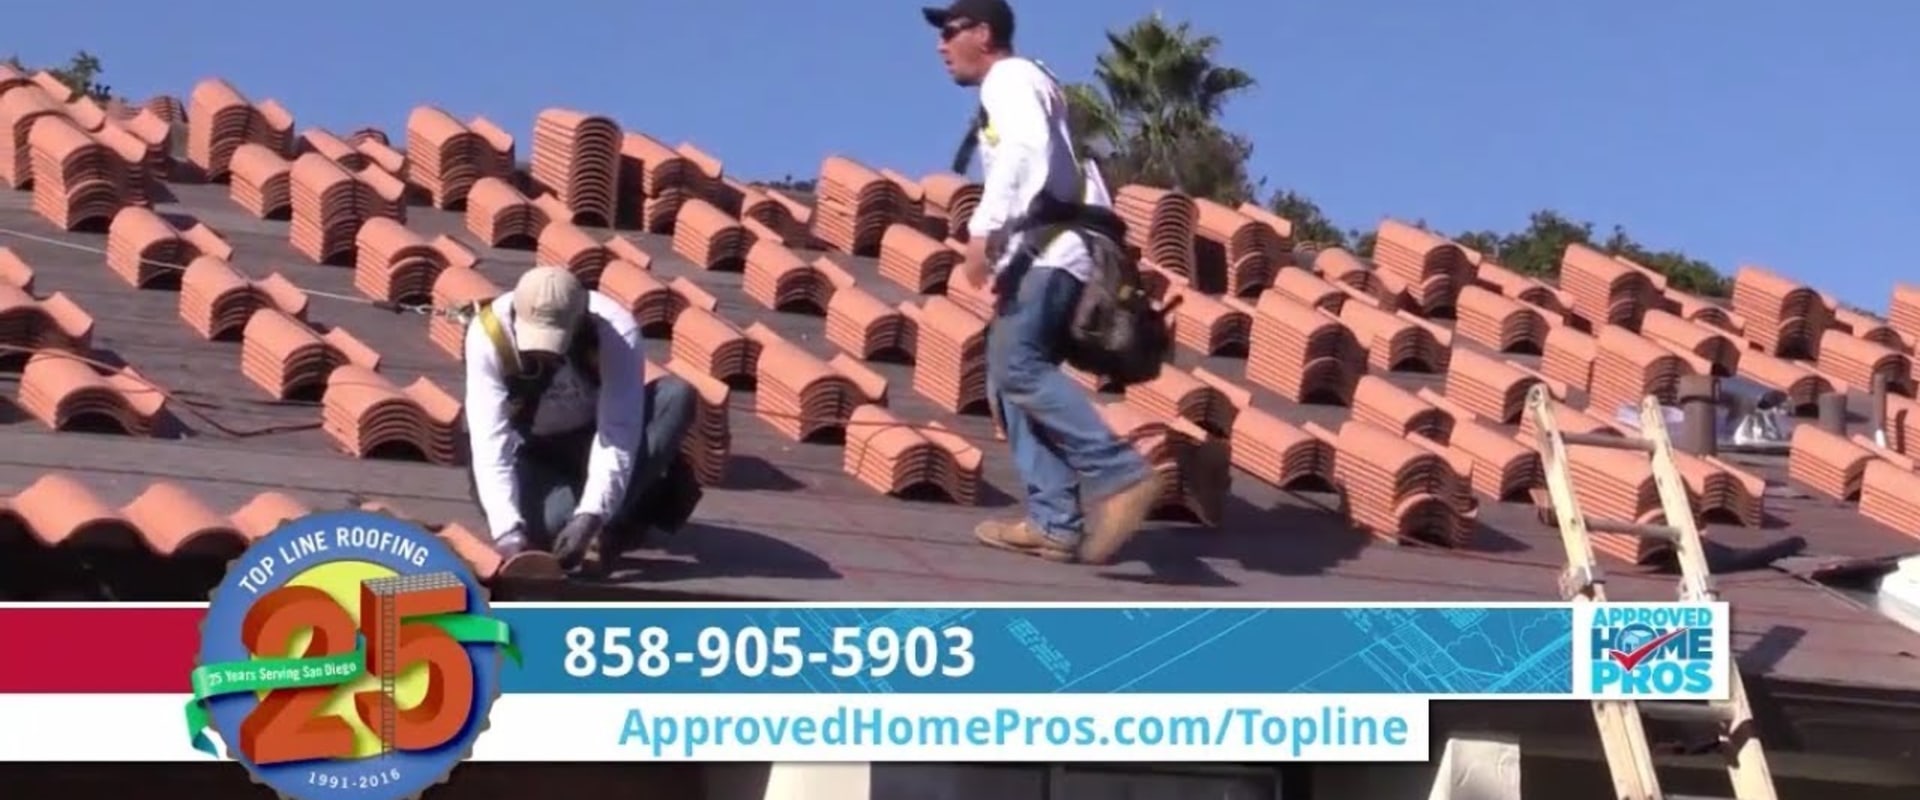 Roofer San Diego Your Top Choice for Professional San Diego Roofing Contractors